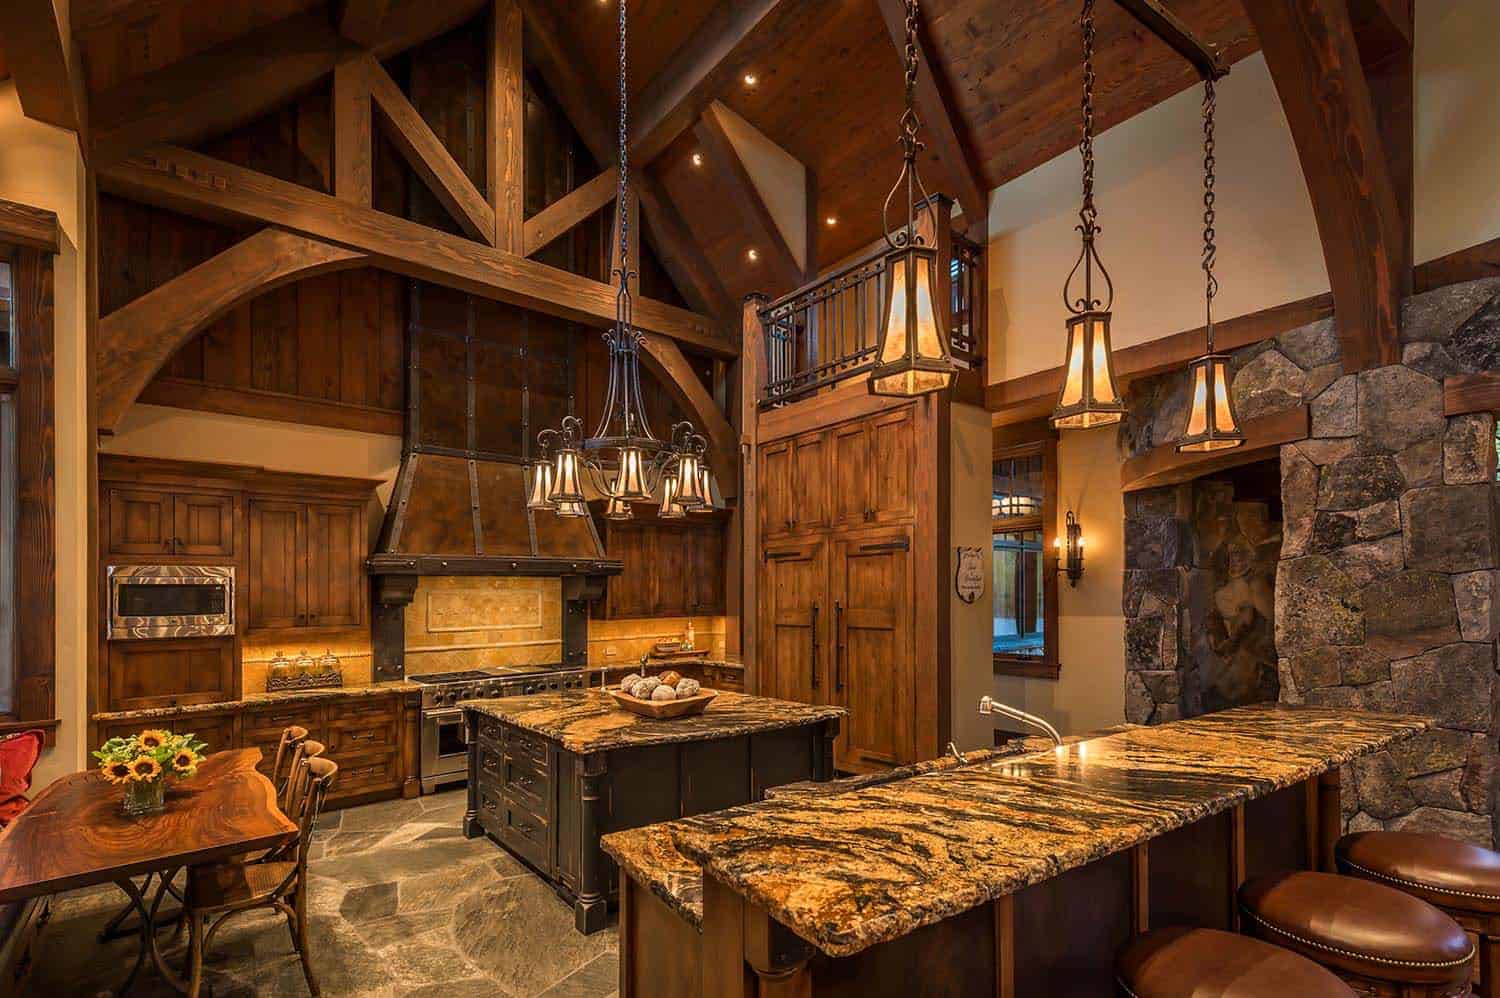 traditional-kitchen